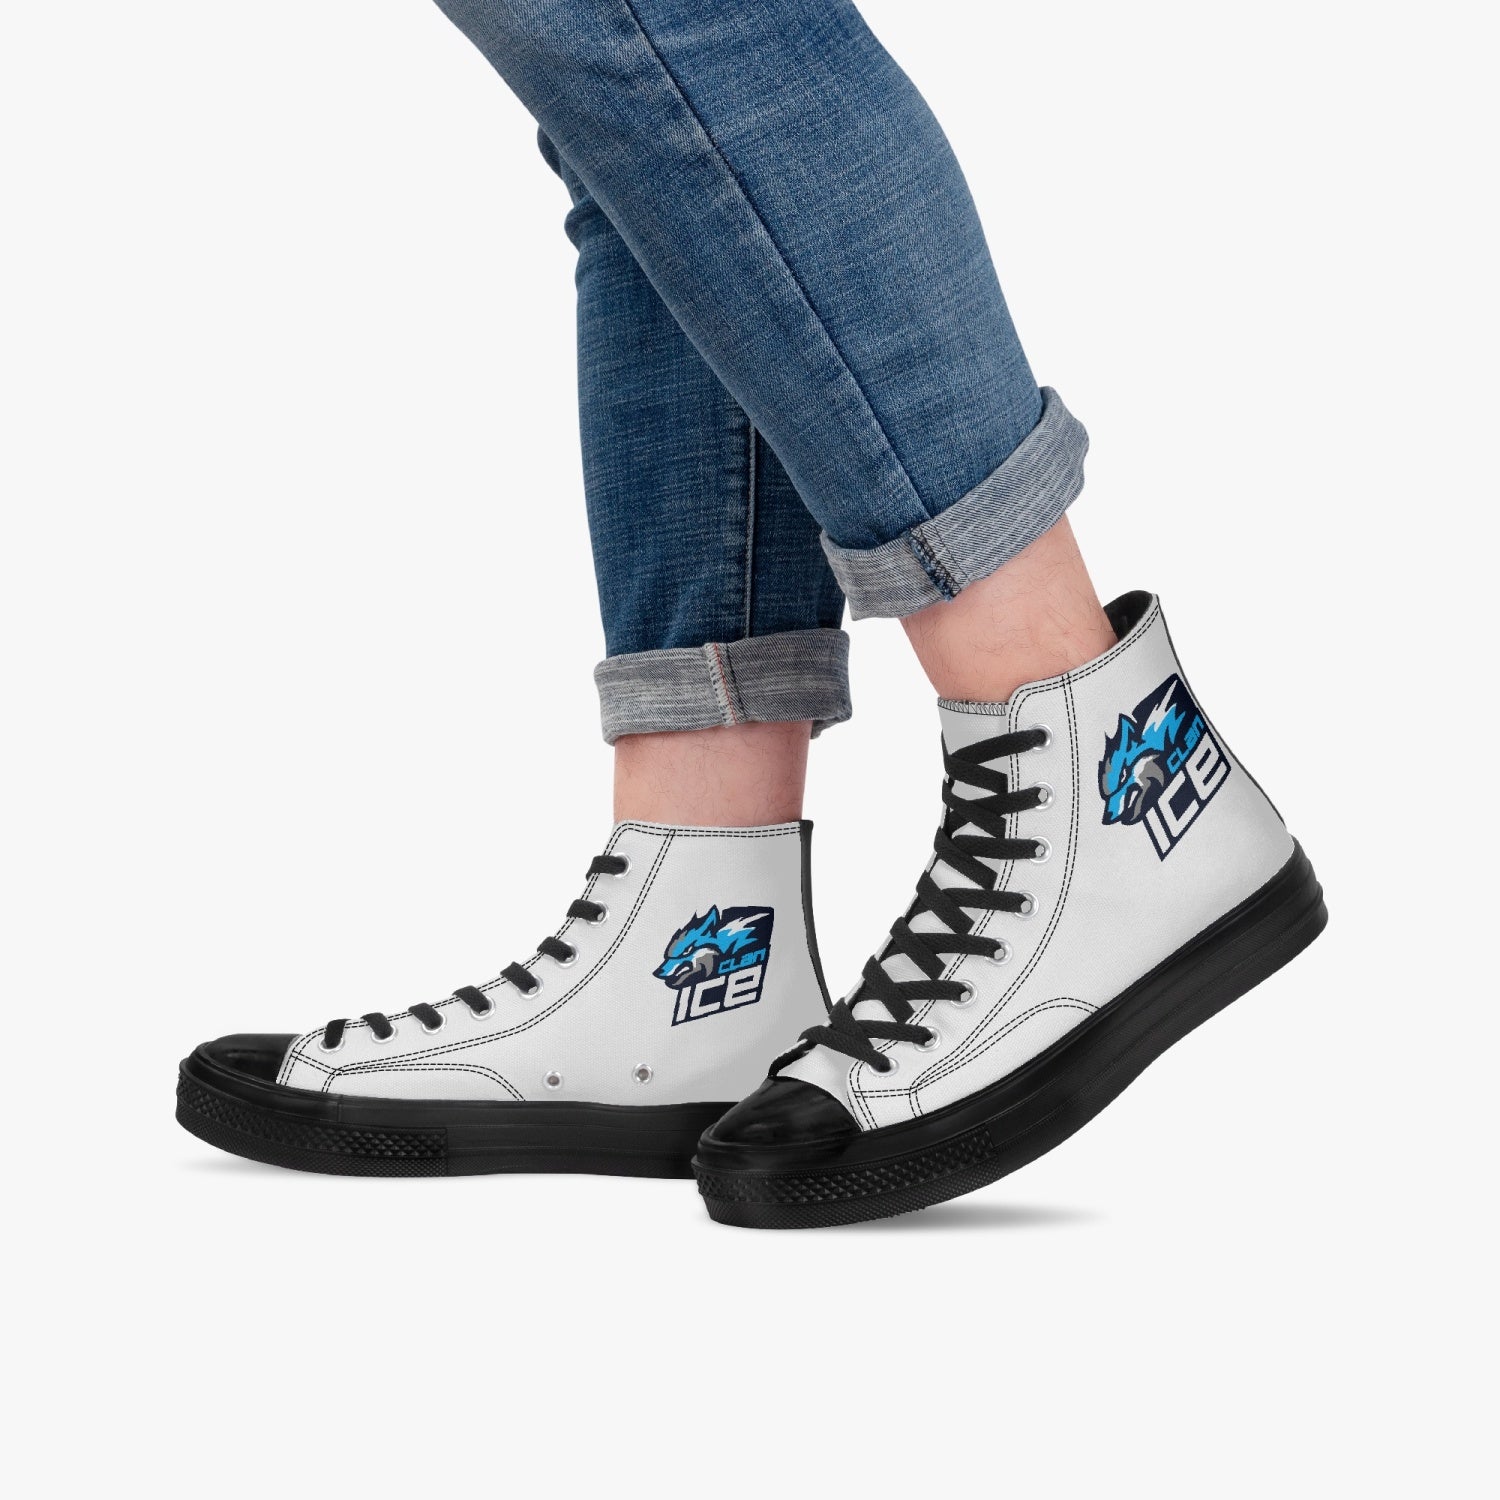 ice High-Top Canvas Shoes